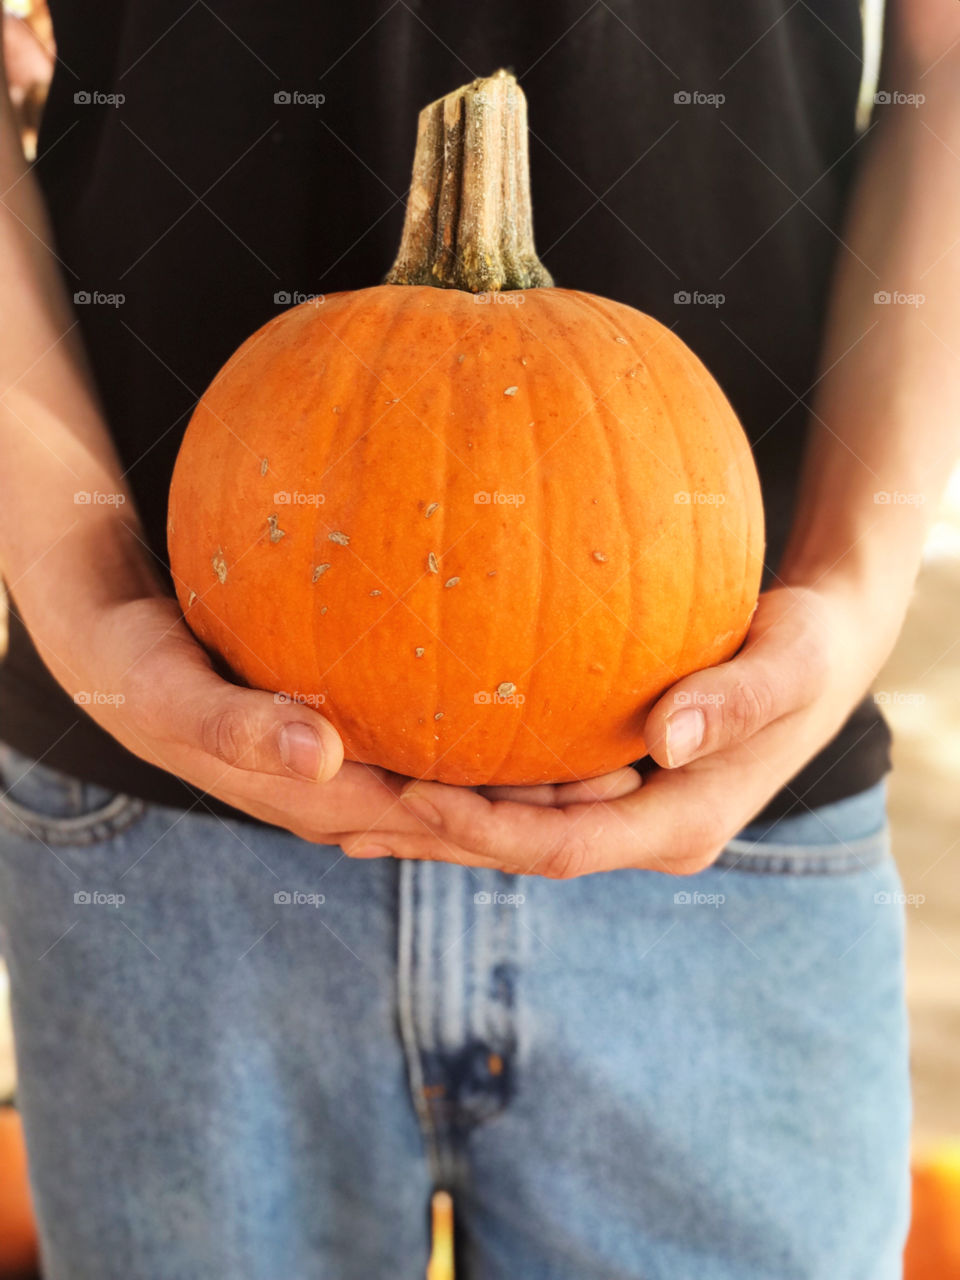 Male wearing black shirt and blue jeans holding a small pumpkin 